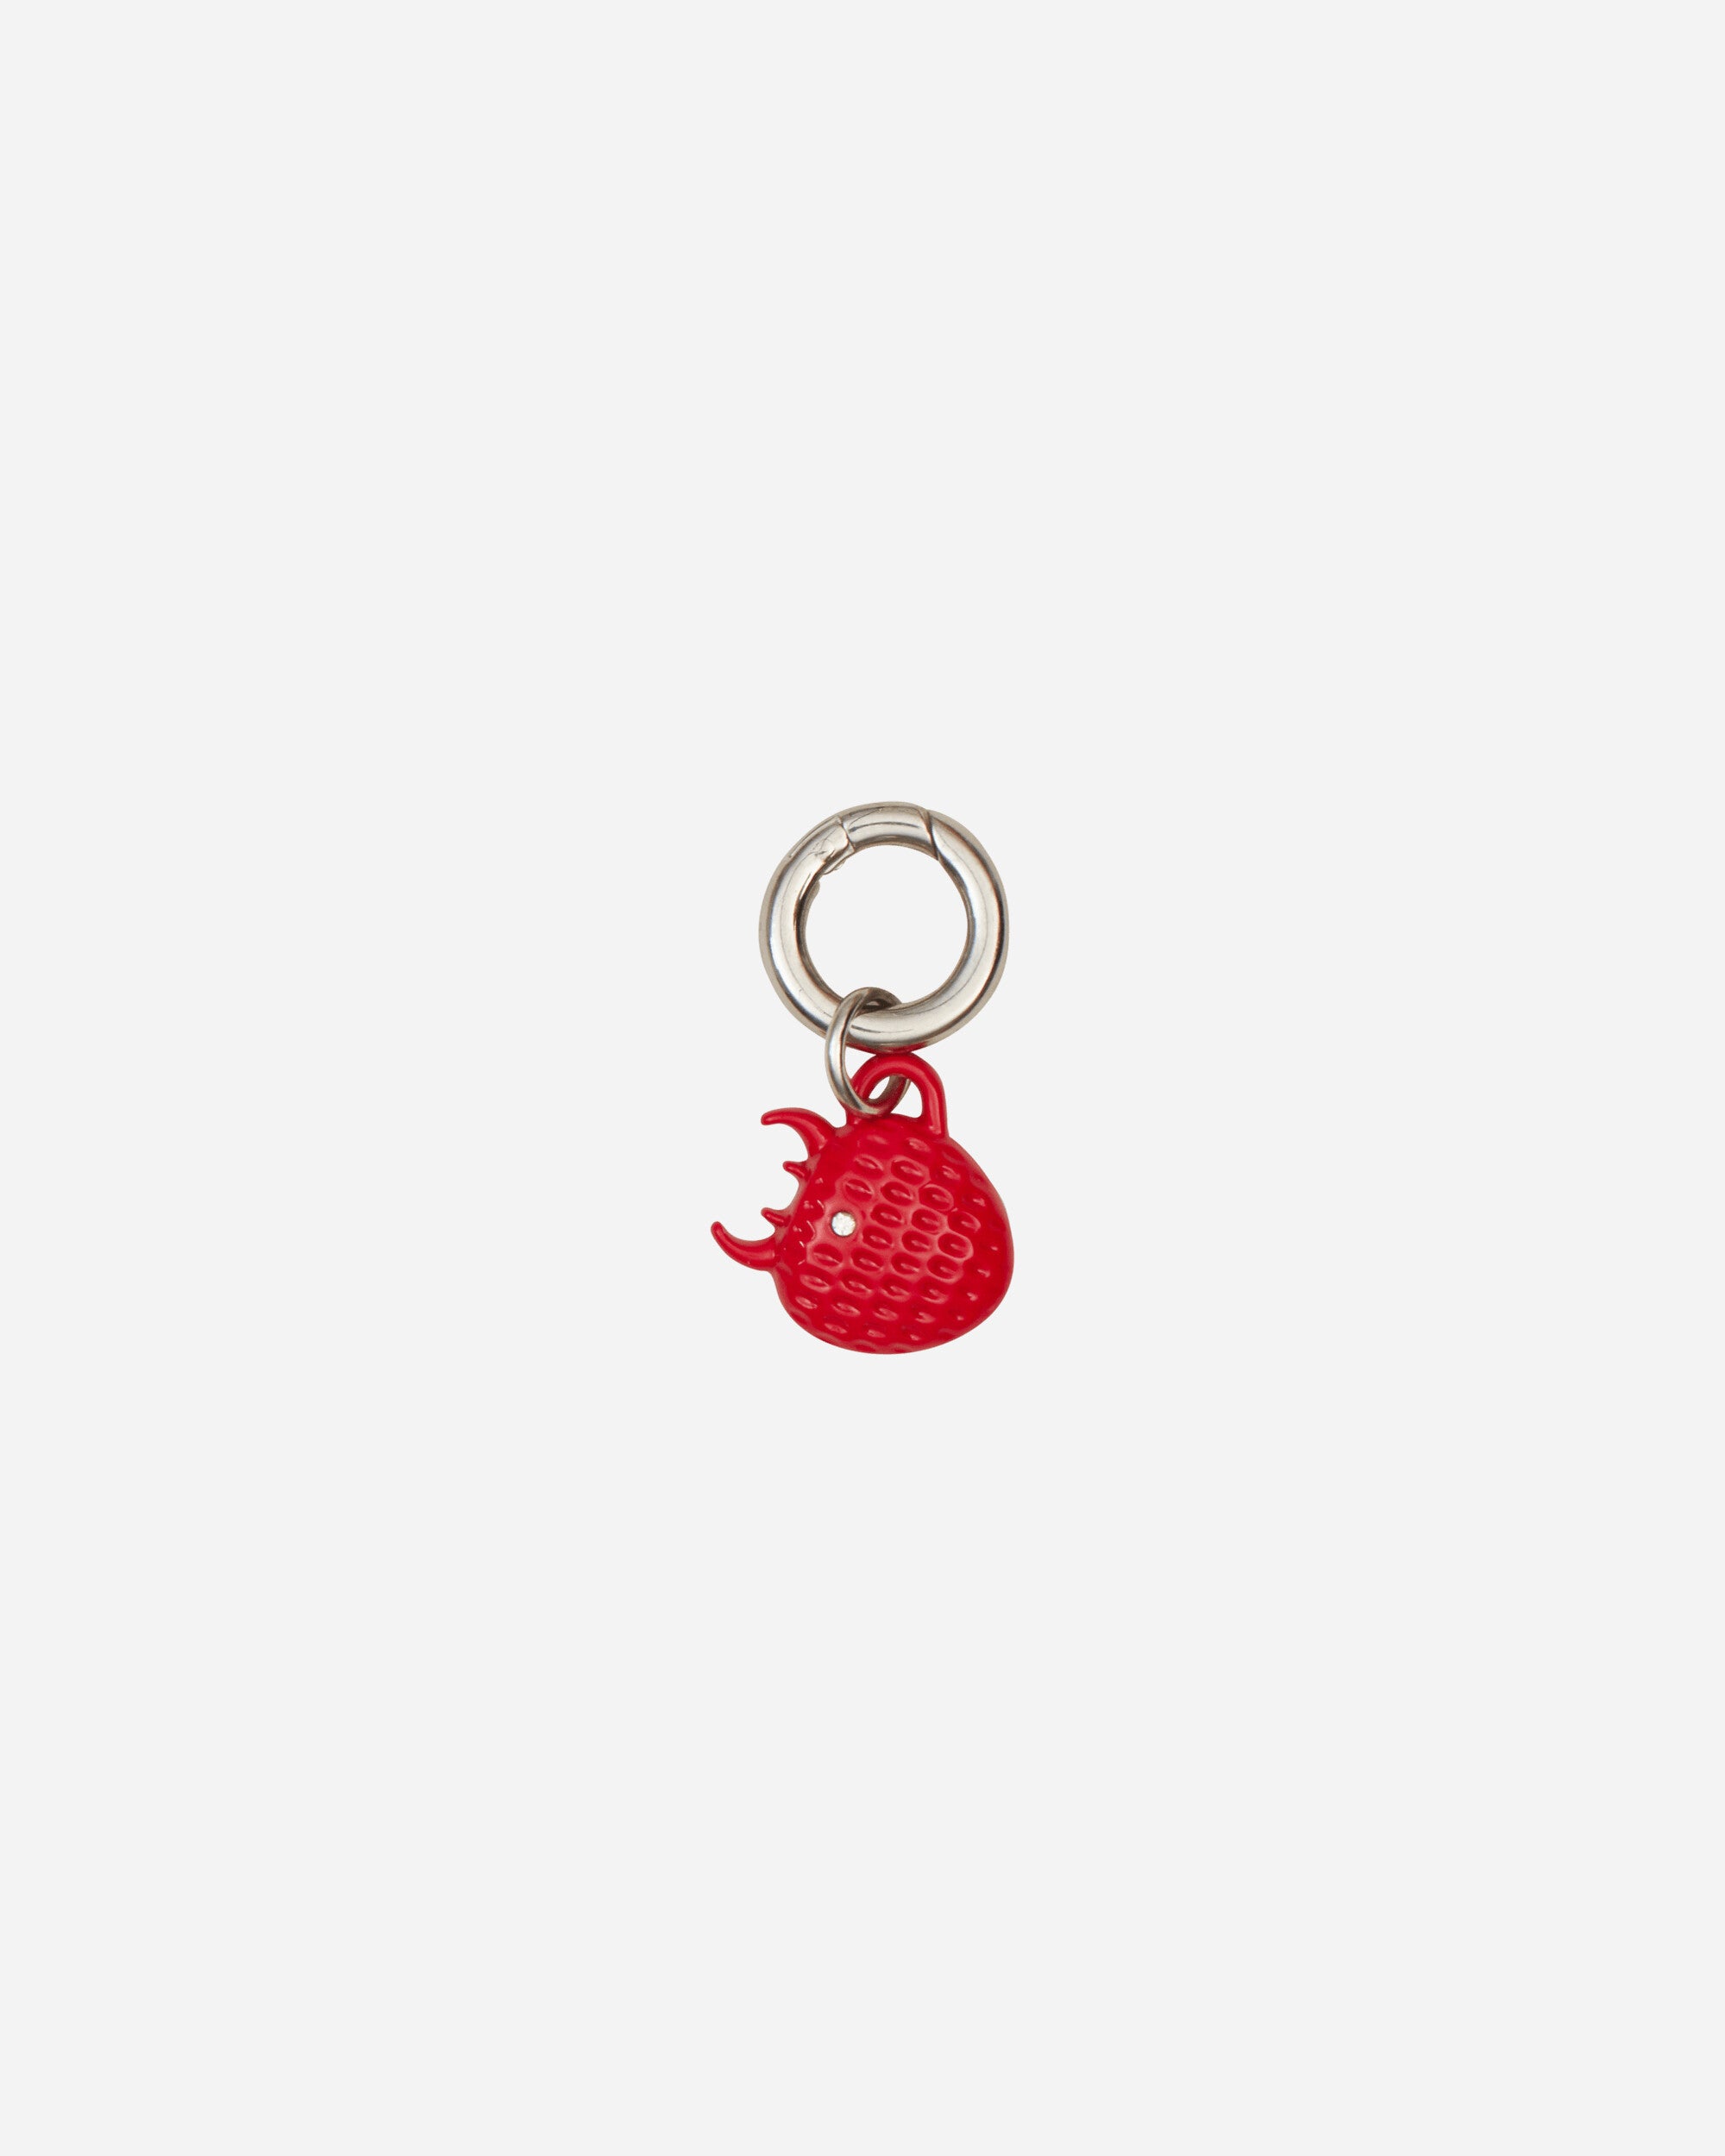 Panties x Anna Wmns Strawberry Devil Charm Red Small Accessories Keychains PXACHARM1 5